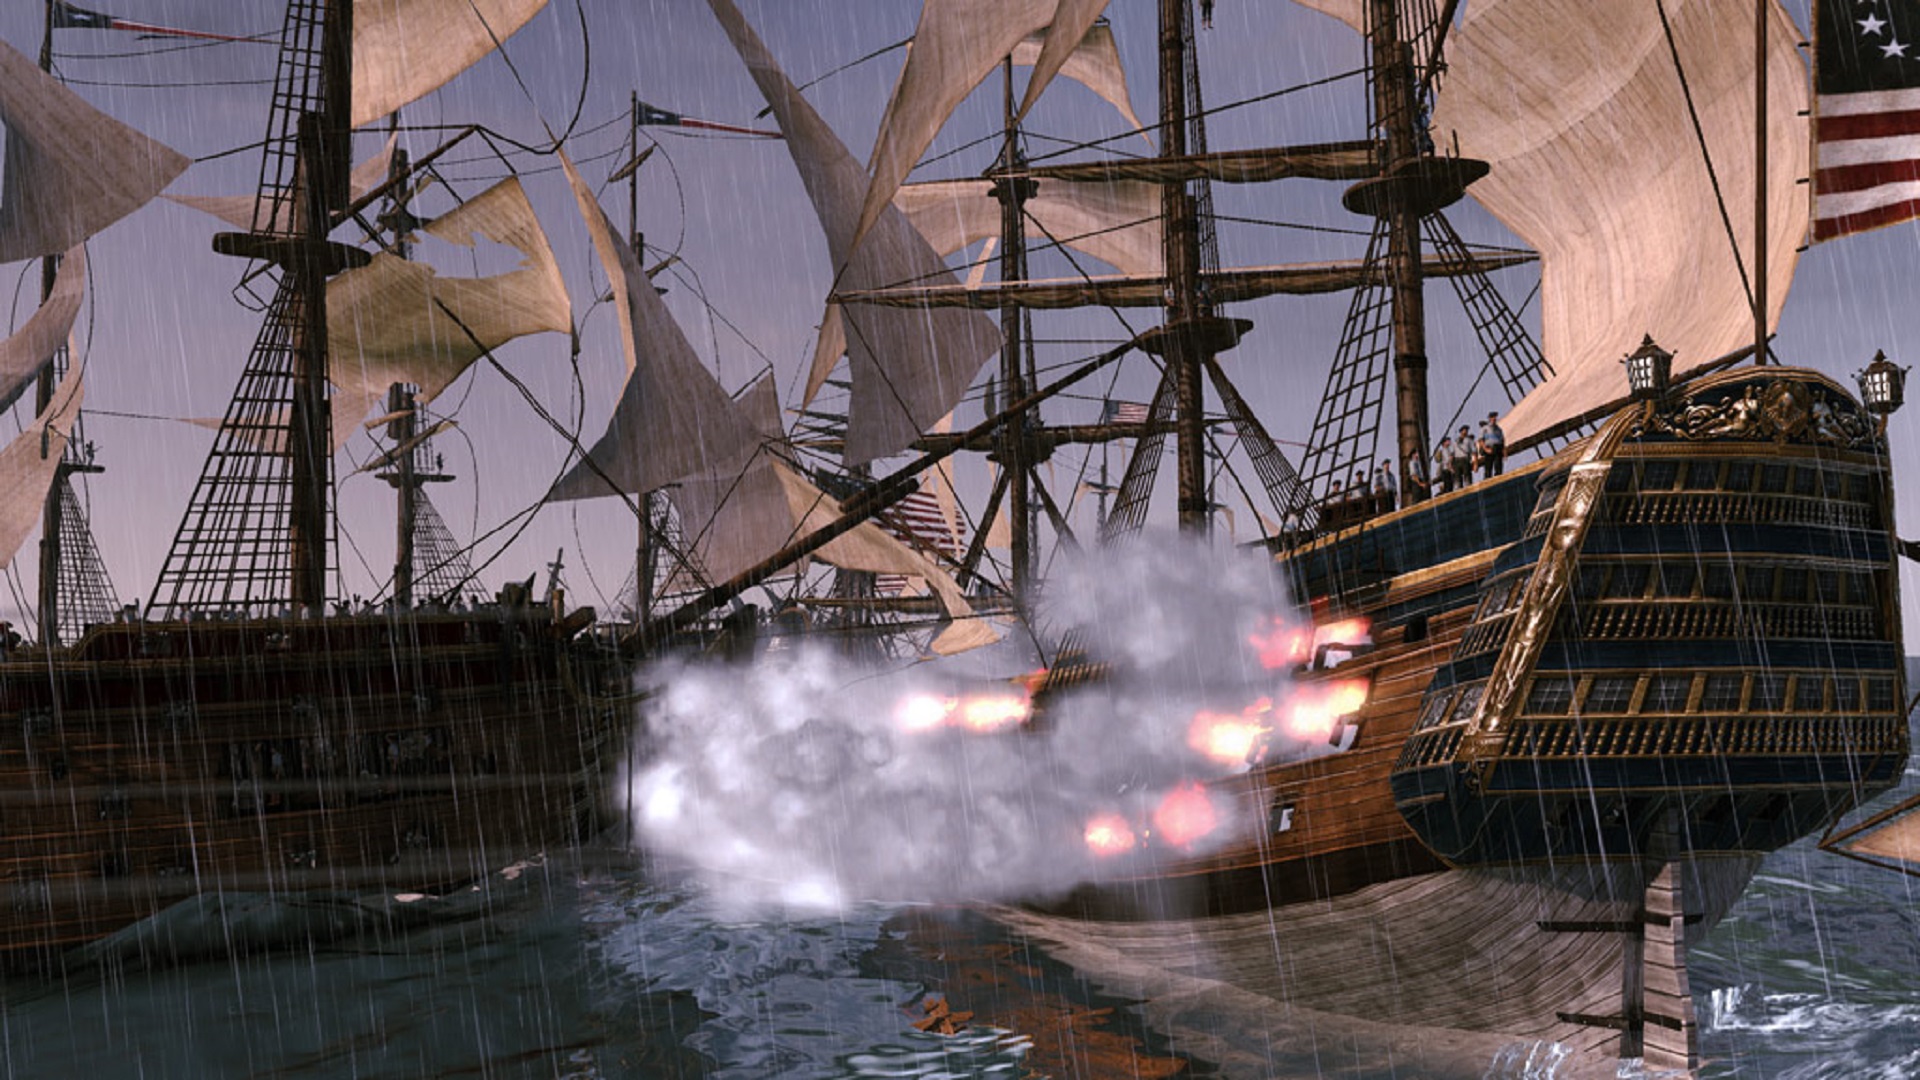 Total War fans are celebrating Empire: Total War’s glorious naval battles